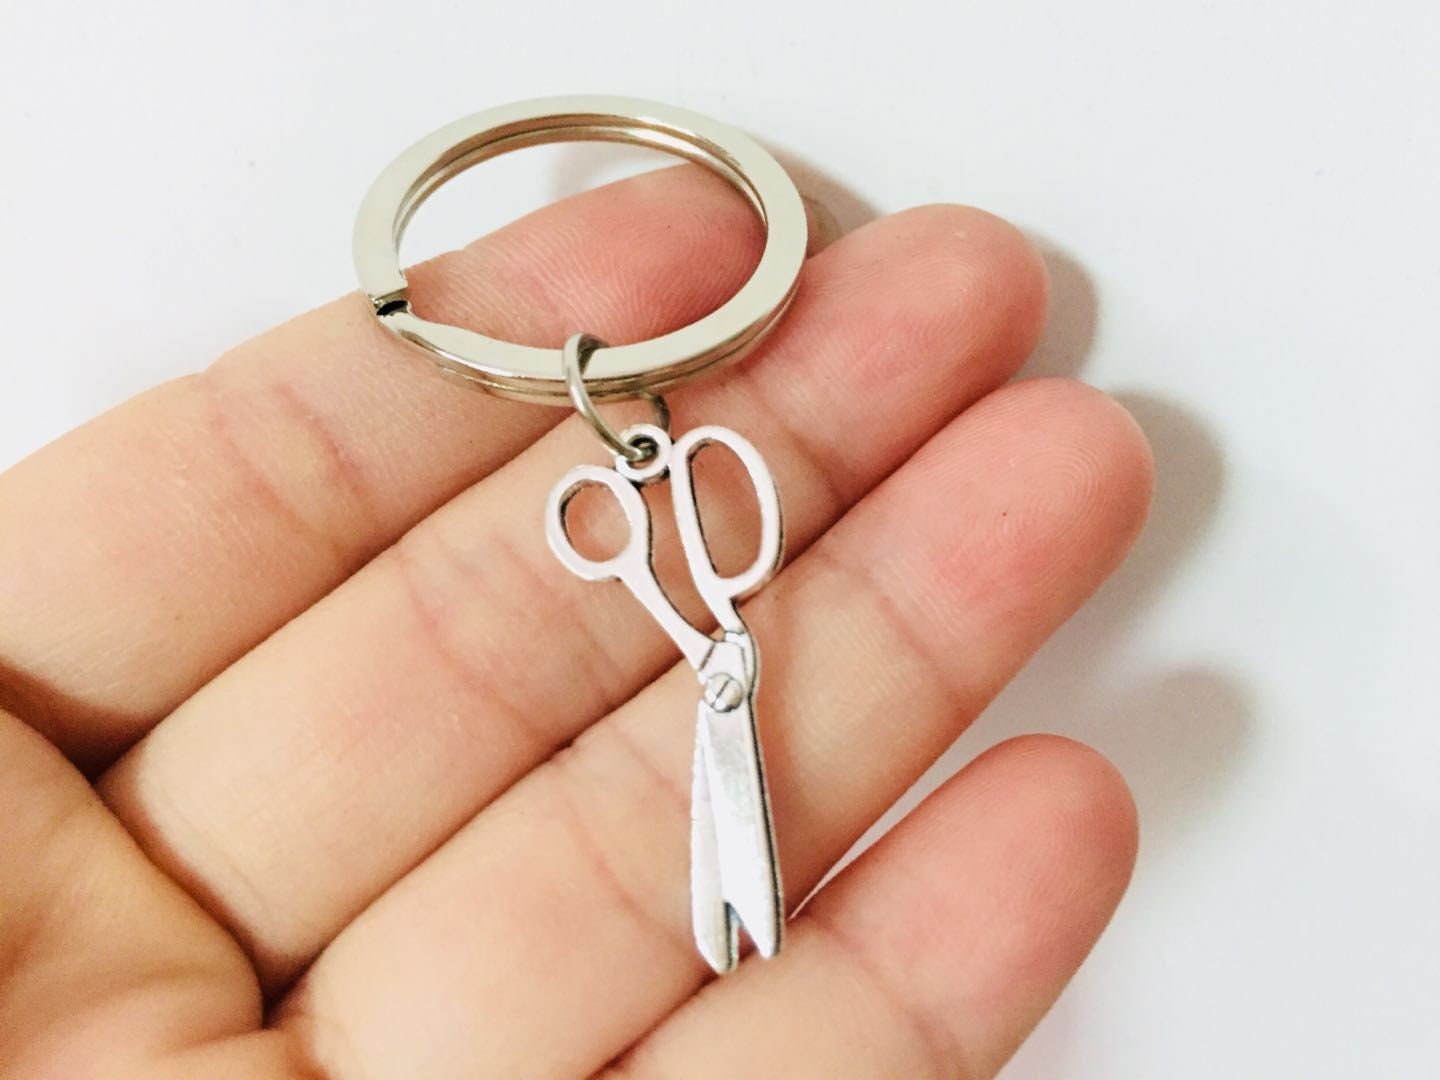 Ten (10) - Silver Key Chain Rings with Attached Chain, 1 Inch Split Key  Chain Ring, 25mm Split Key Ring Chain, Keychain FOB, Split Key Ring